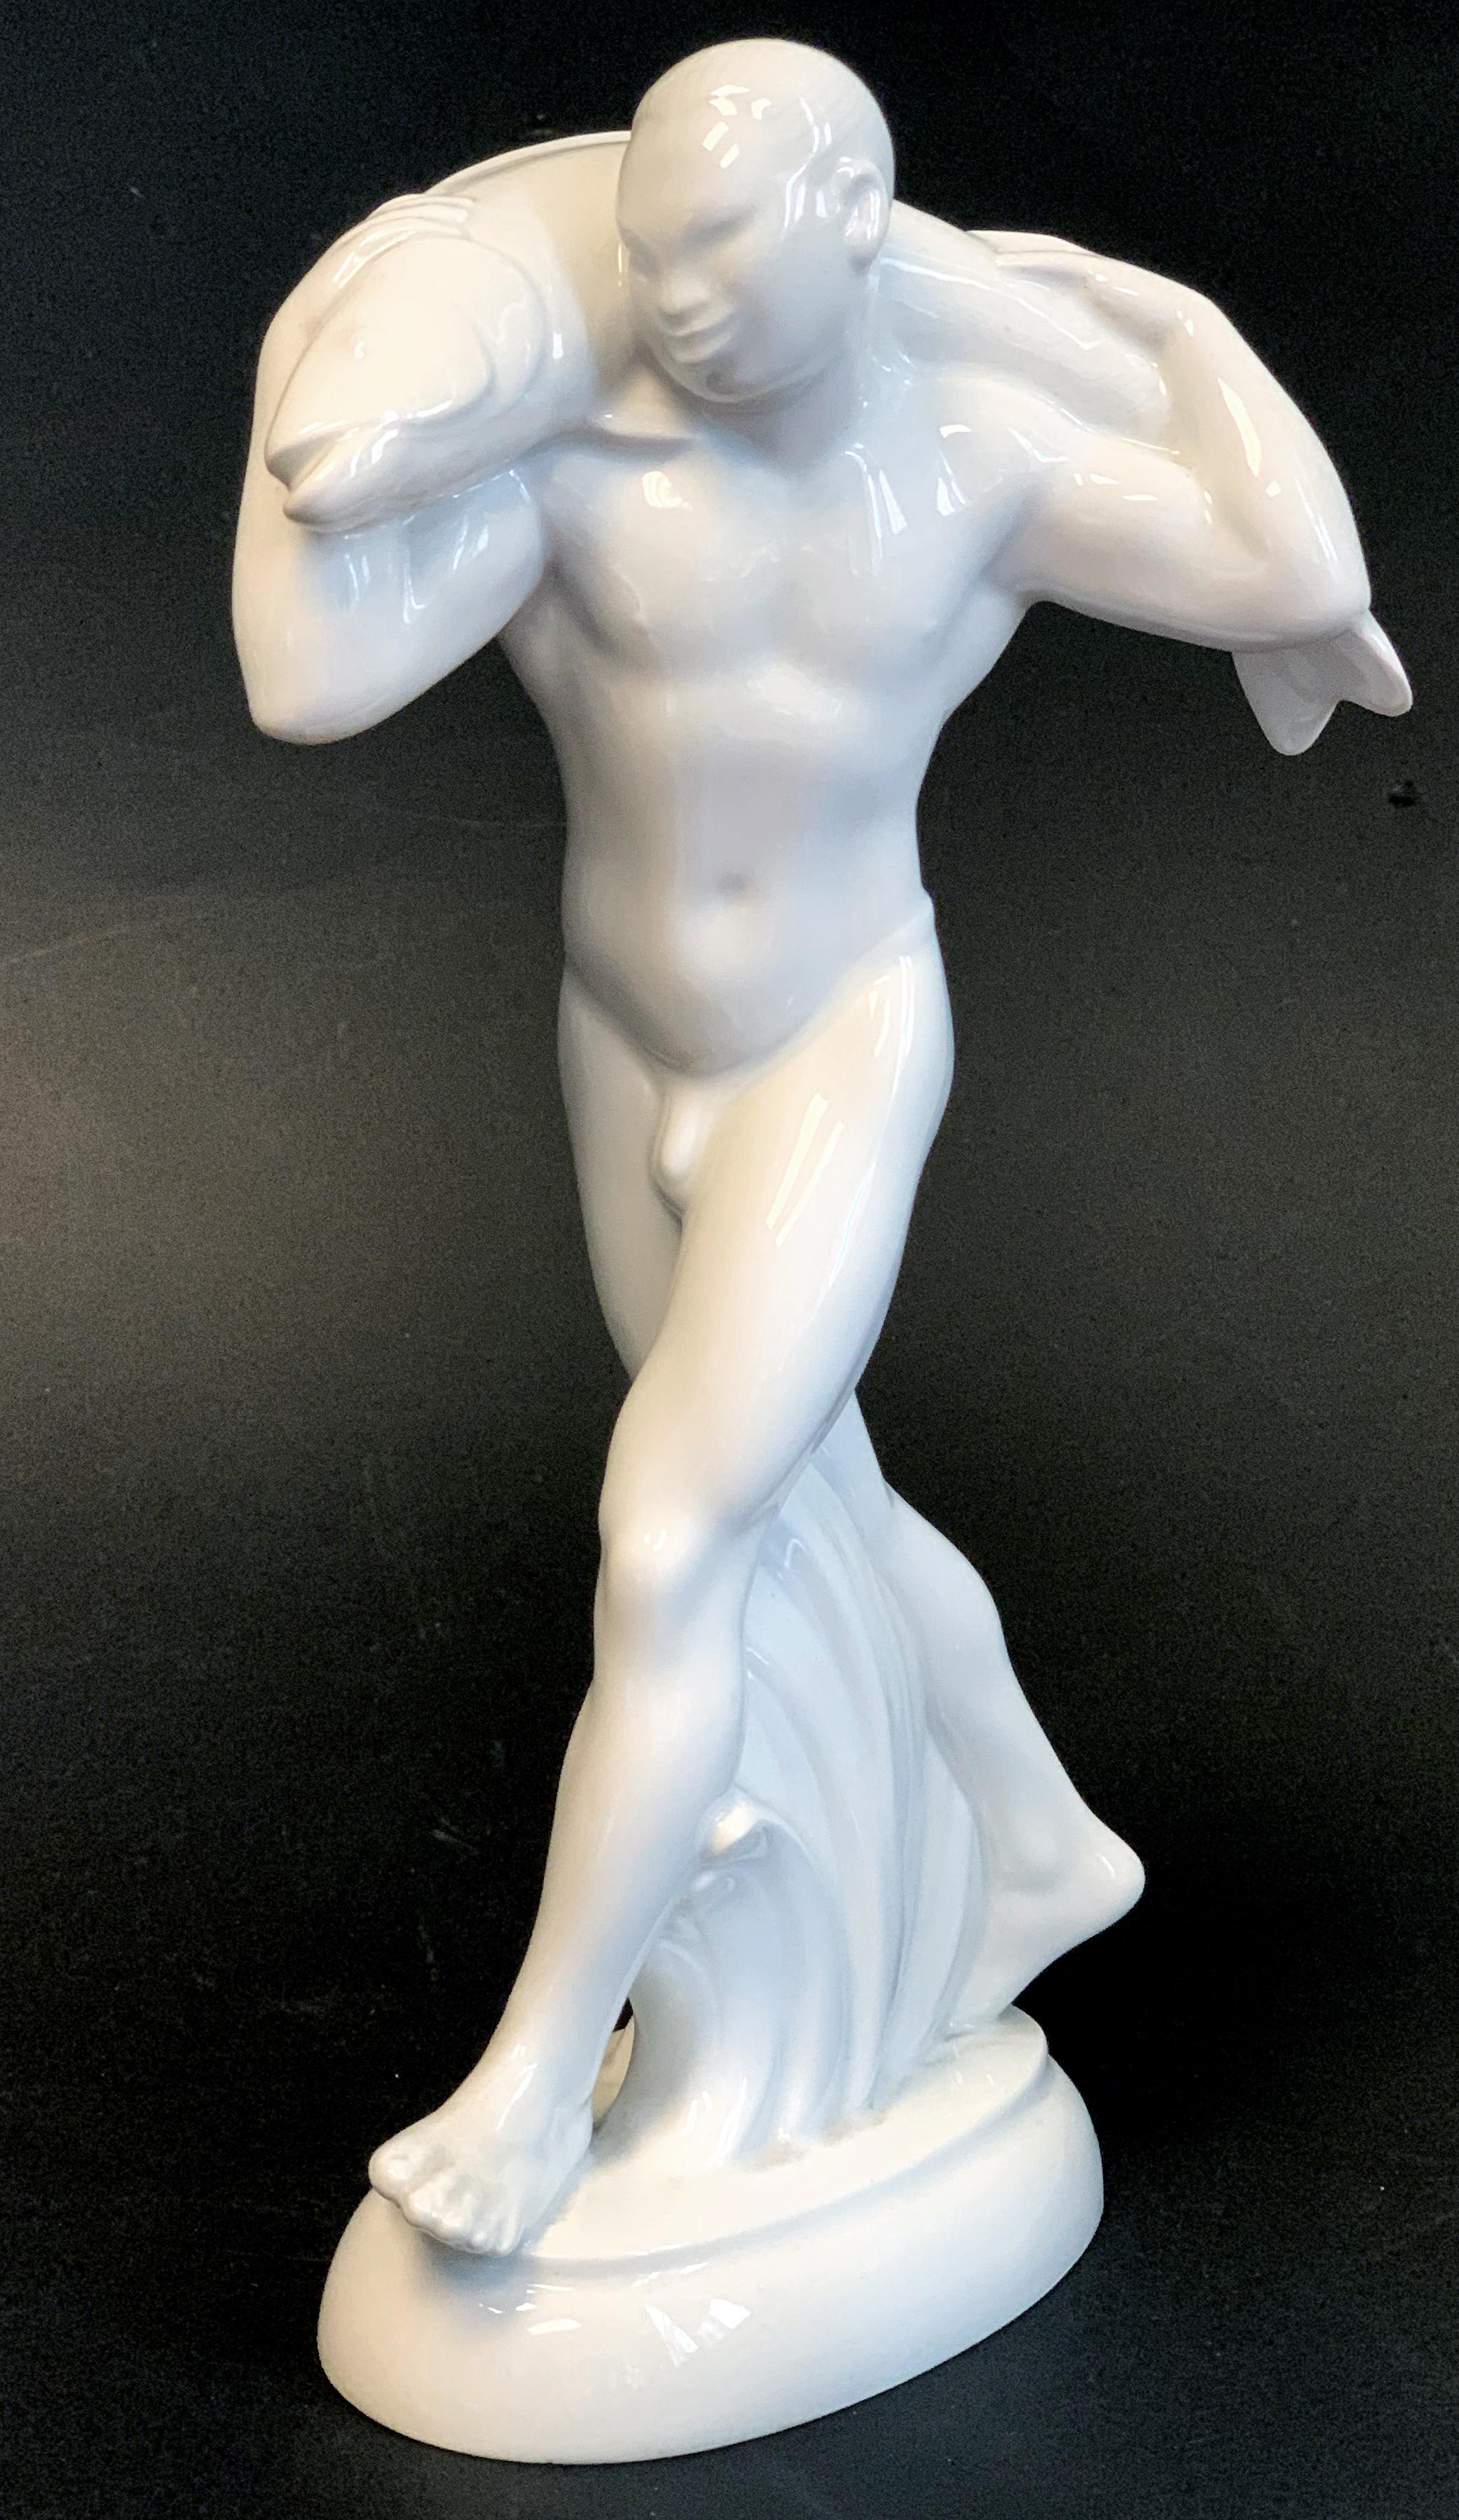 Rare and striking, this porcelain sculpture depicting a nude Japanese male figure carrying a fish on his shoulders was sculpted by Adolf (or Adolph) Amberg for KPM in 1905, to celebrate the wedding of Prussian Crown Prince Wilhelm to Duchess Cecilie